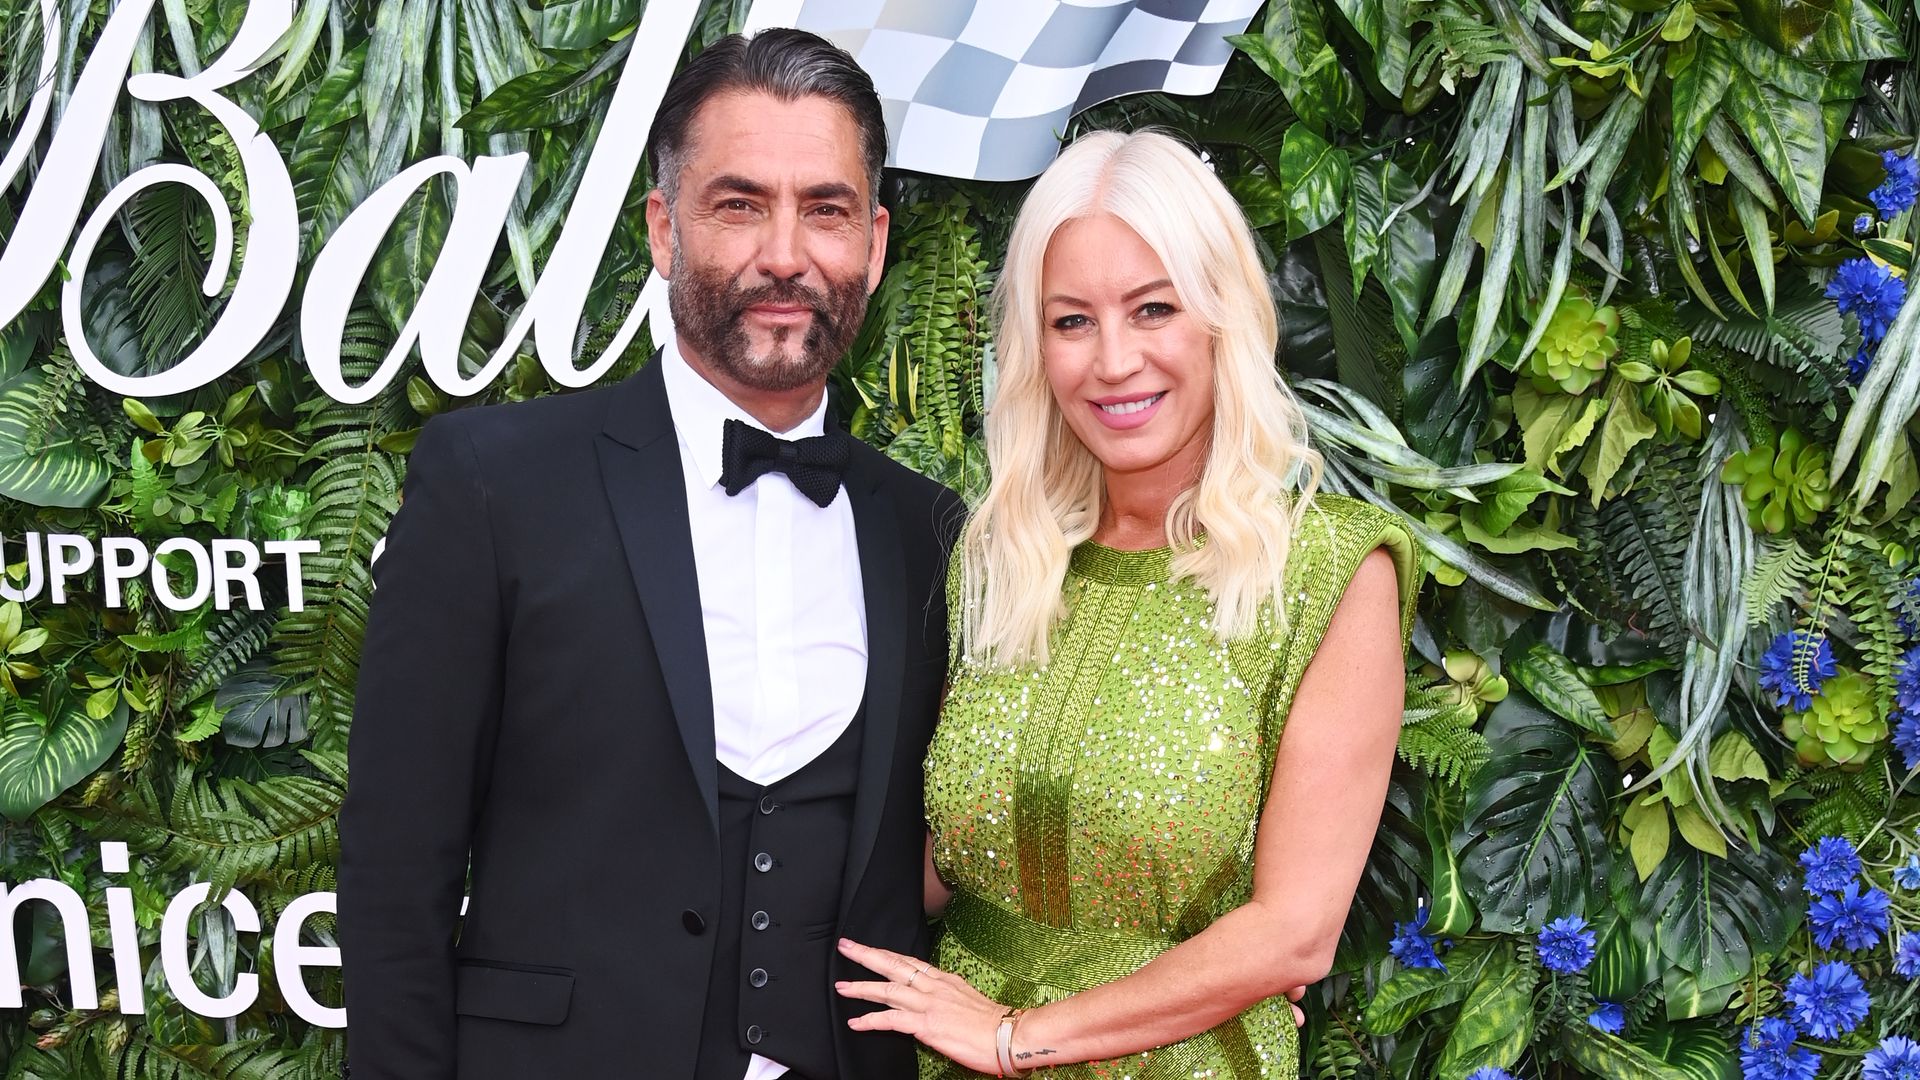 Denise van Outen and Jimmy Barba at the Grand Prix Ball